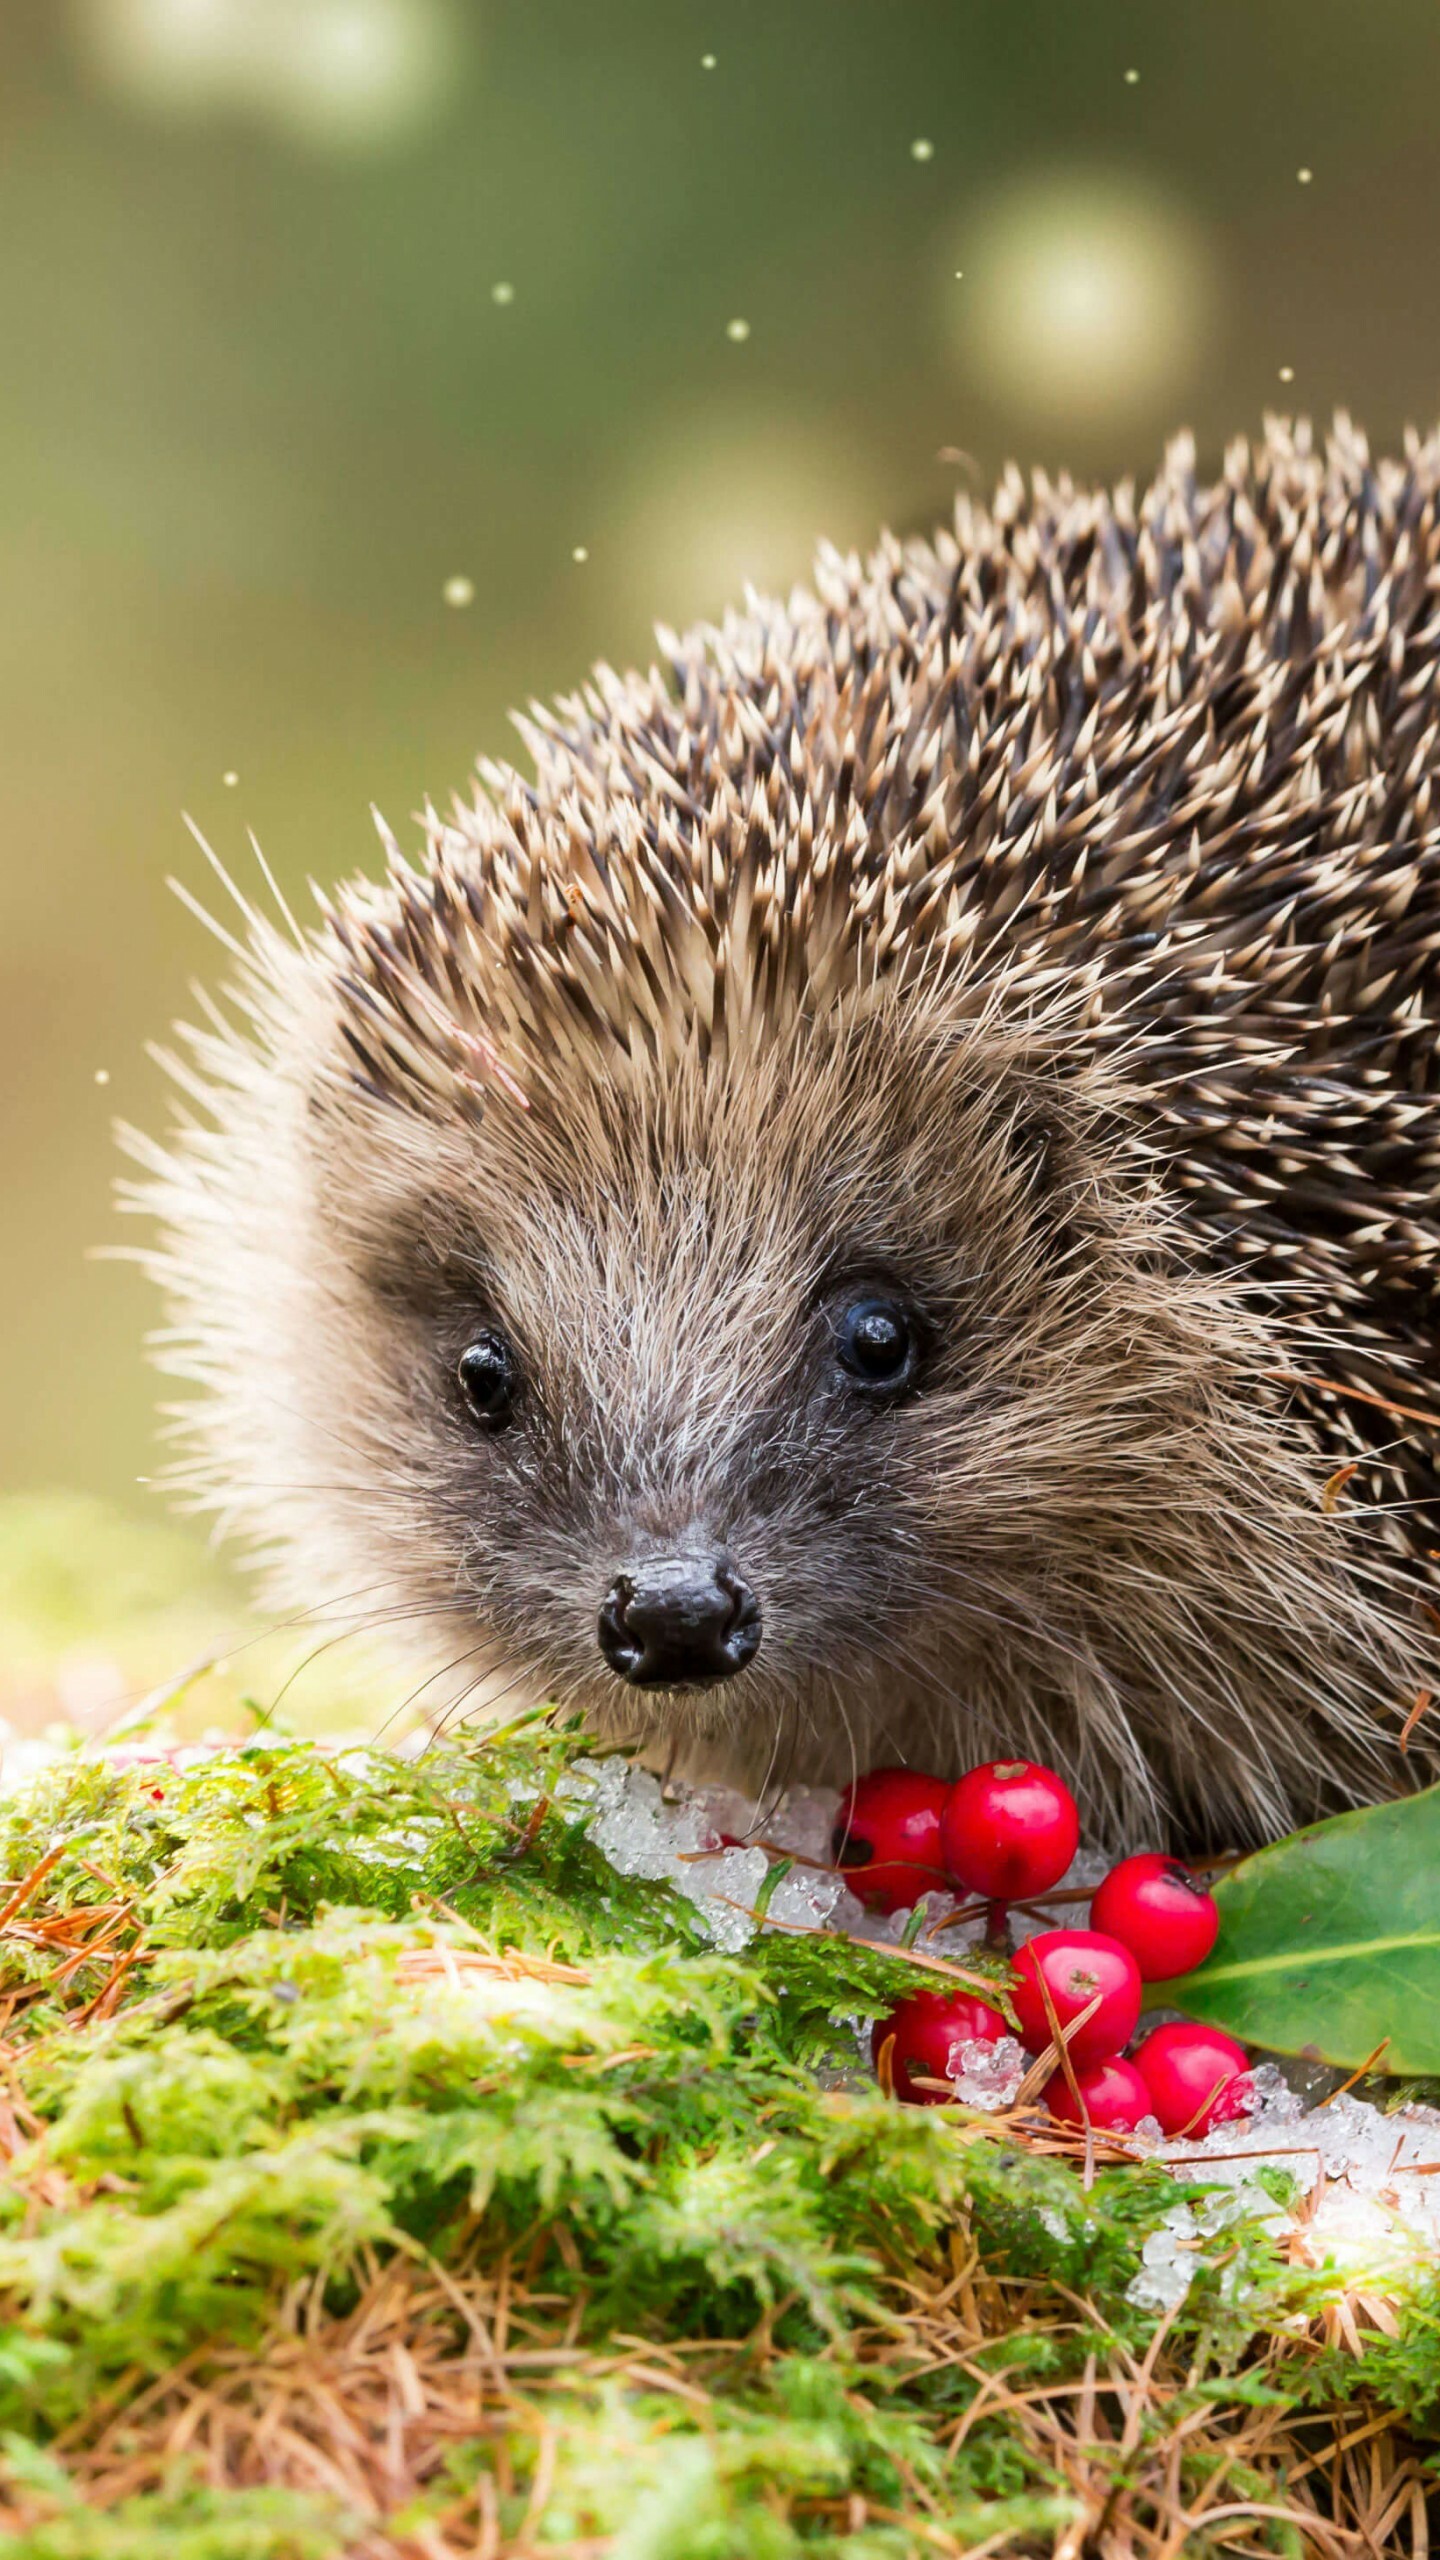 Hedgehog: Covers its quills with foamy saliva after exposure to a strong, unpleasant smell or taste. 1440x2560 HD Wallpaper.